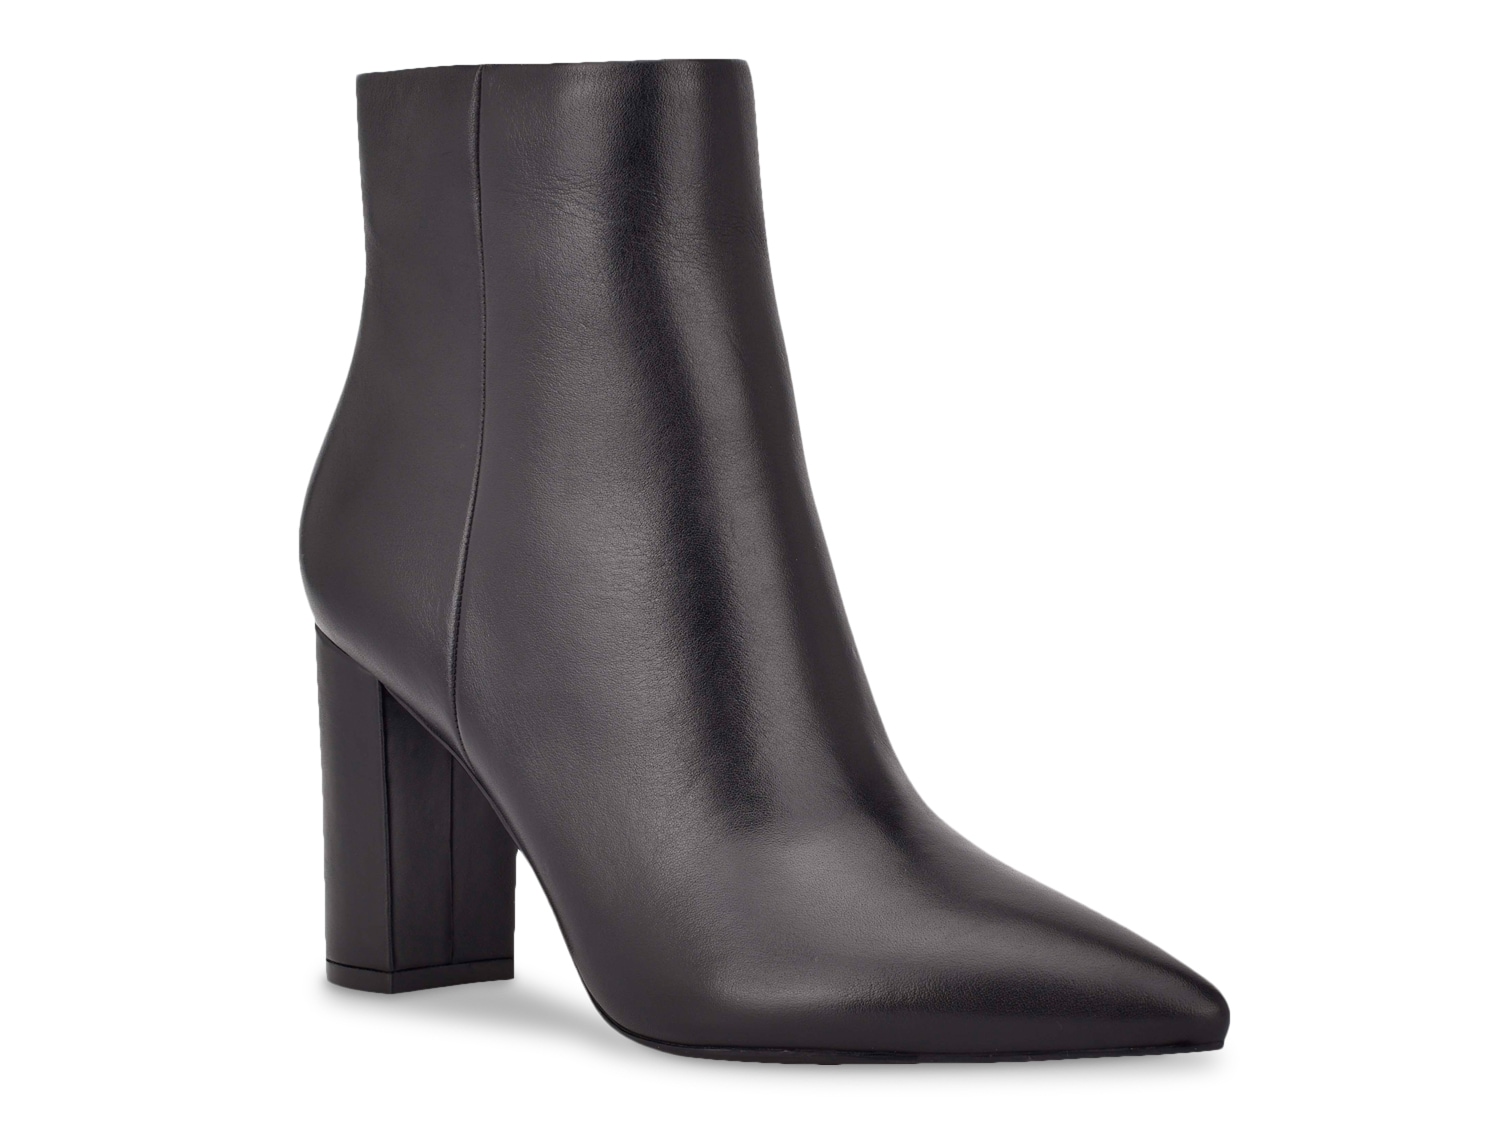 marc fisher black leather booties